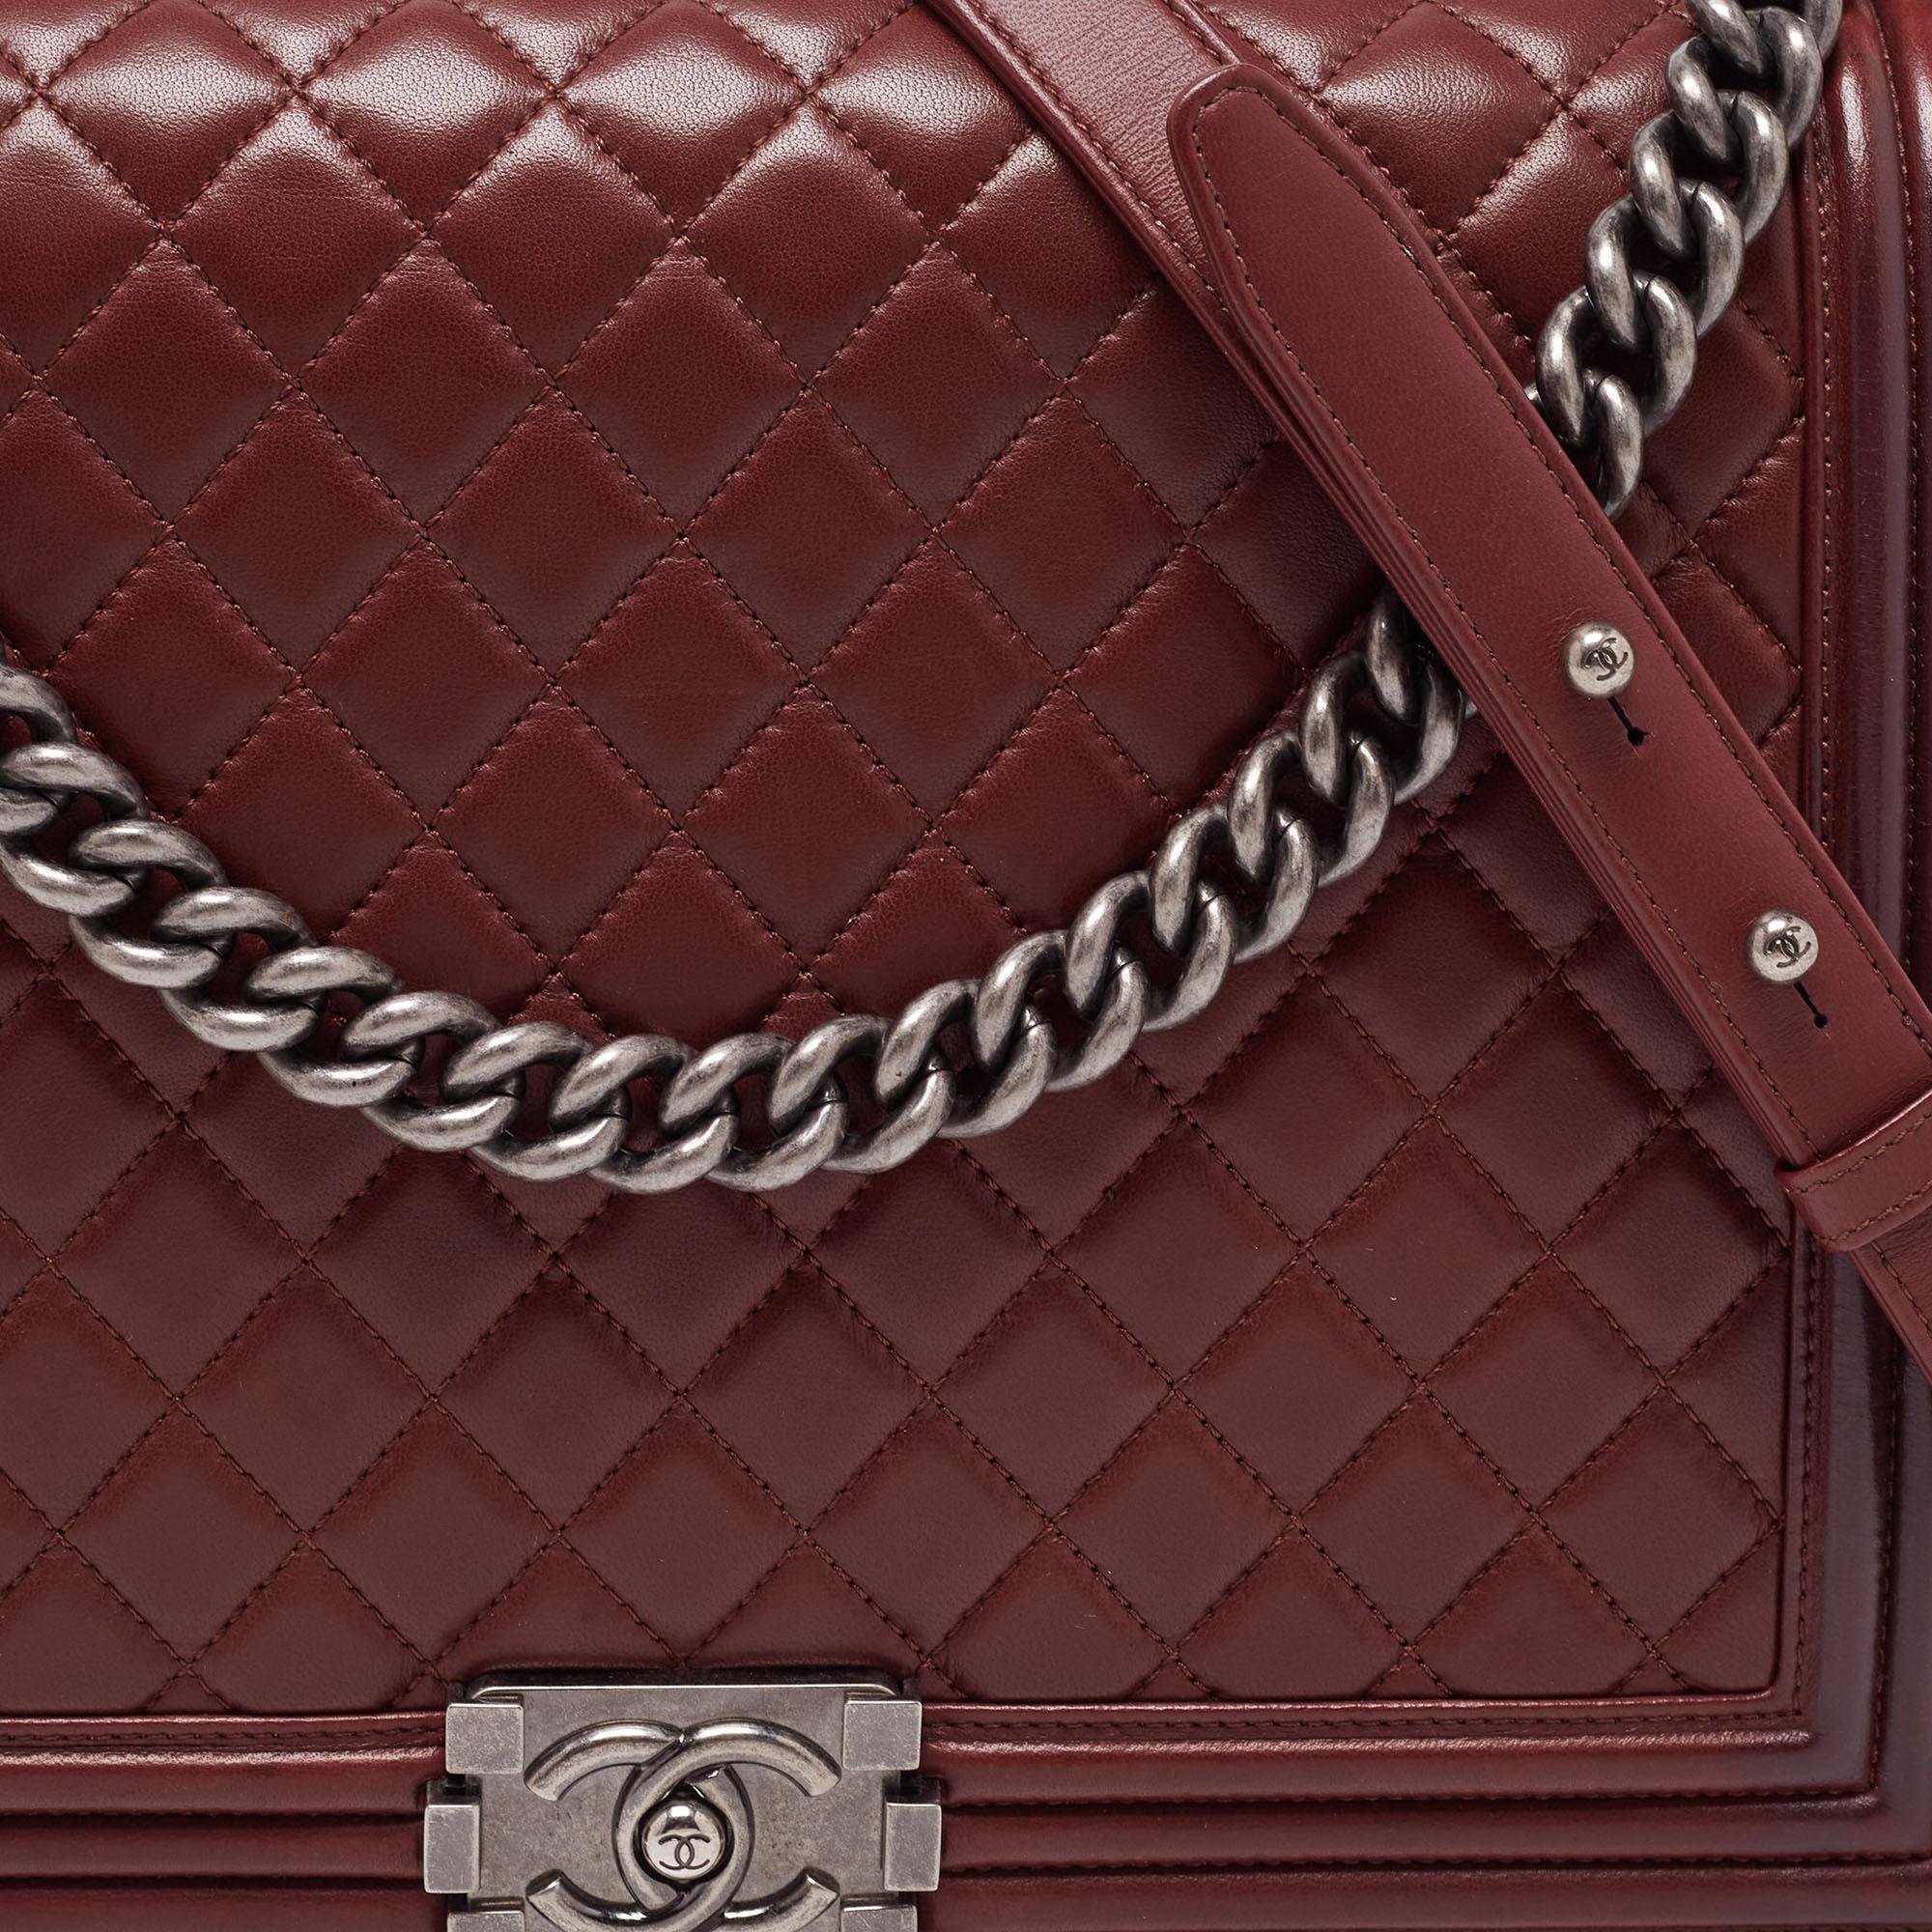 Chanel Burgundy Quilted Leather Large Boy Flap Bag 7